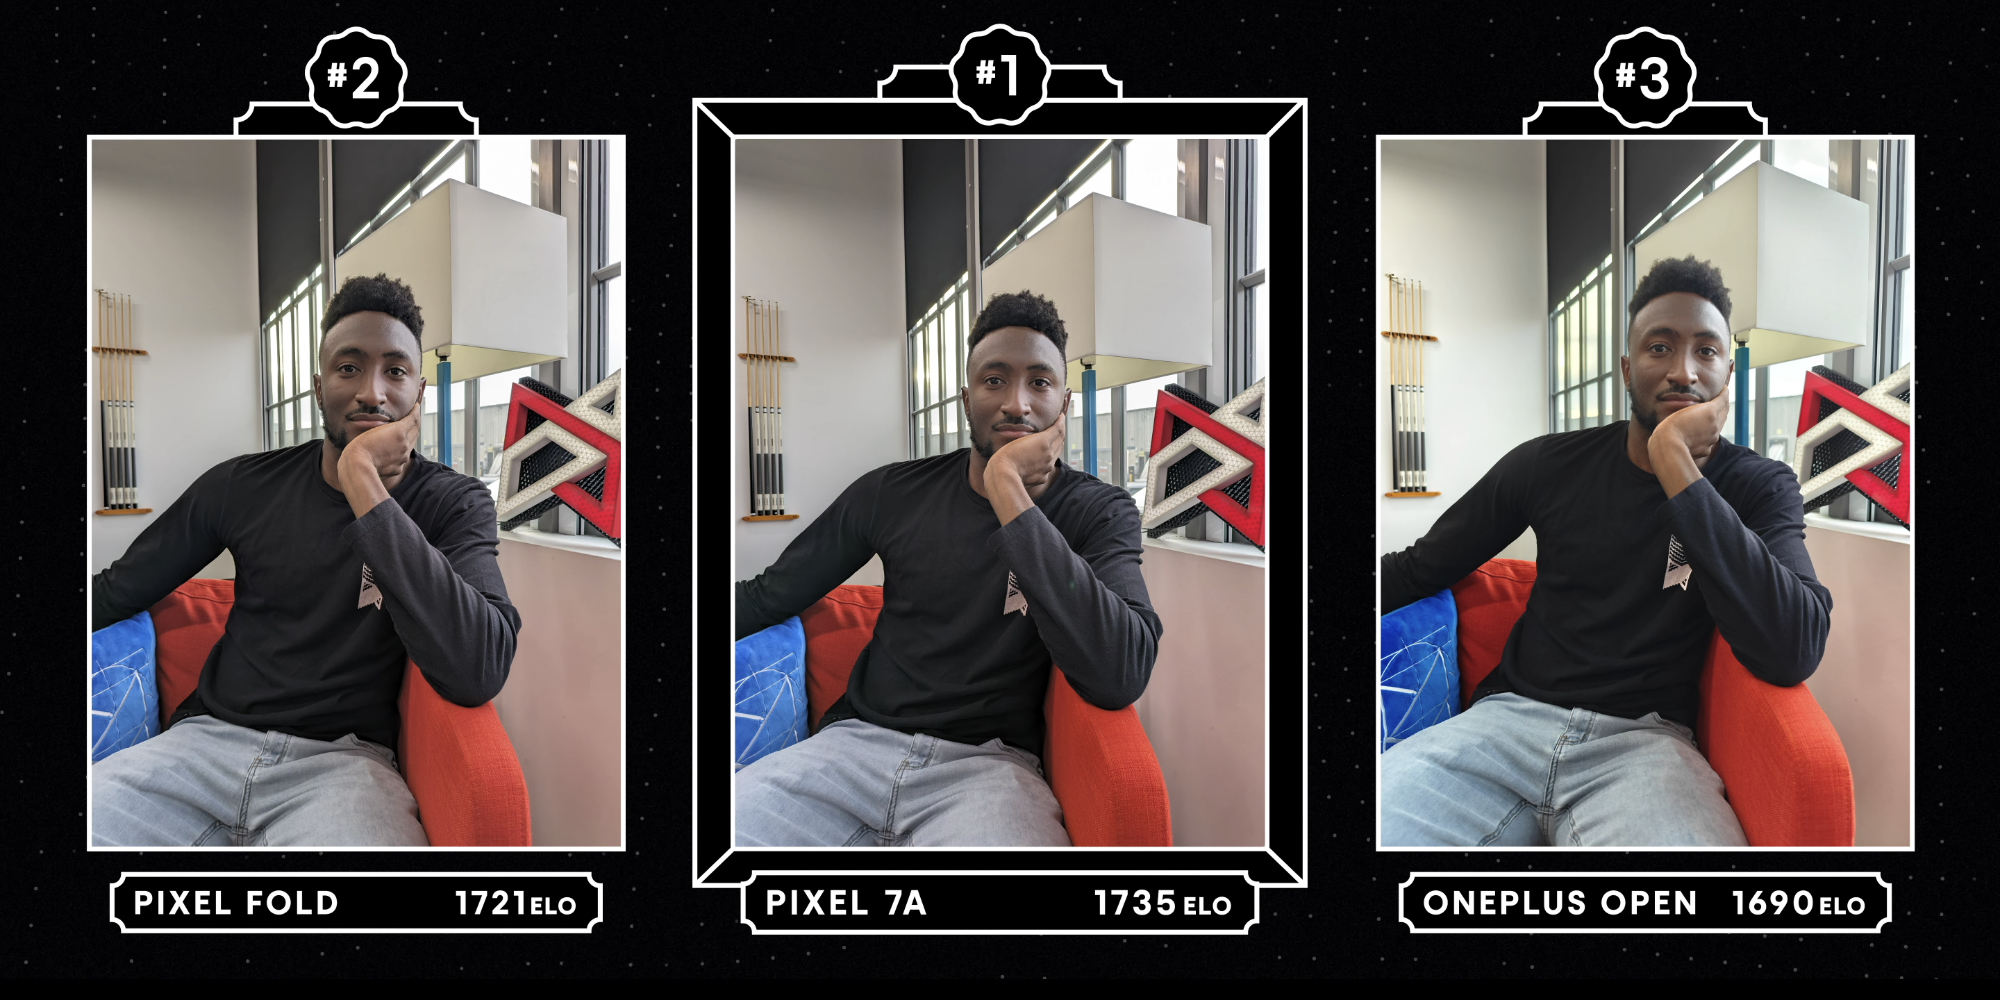 The MKBHD technoblogger's blind test revealed a smartphone with the best camera